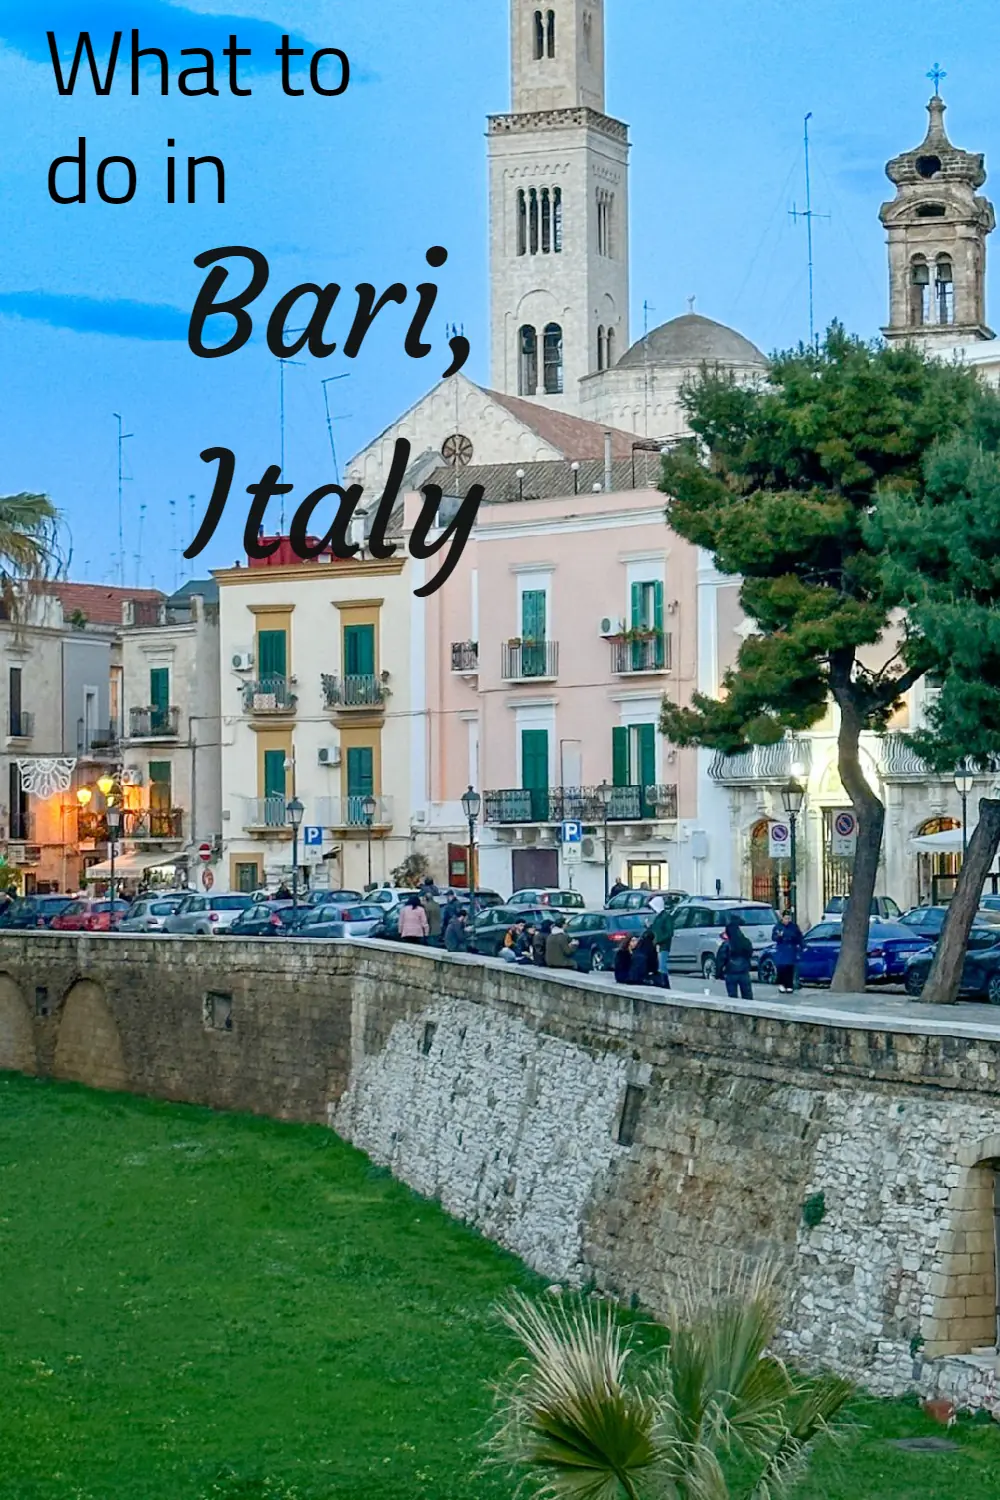 Discover the hidden gems of the enigmatic port city of Bari. A place where history whispers from every corner and exquisite handmade pasta lingers on every palate. Stay tuned to our journey through the delightful alleyways and intriguing stories of the old town.